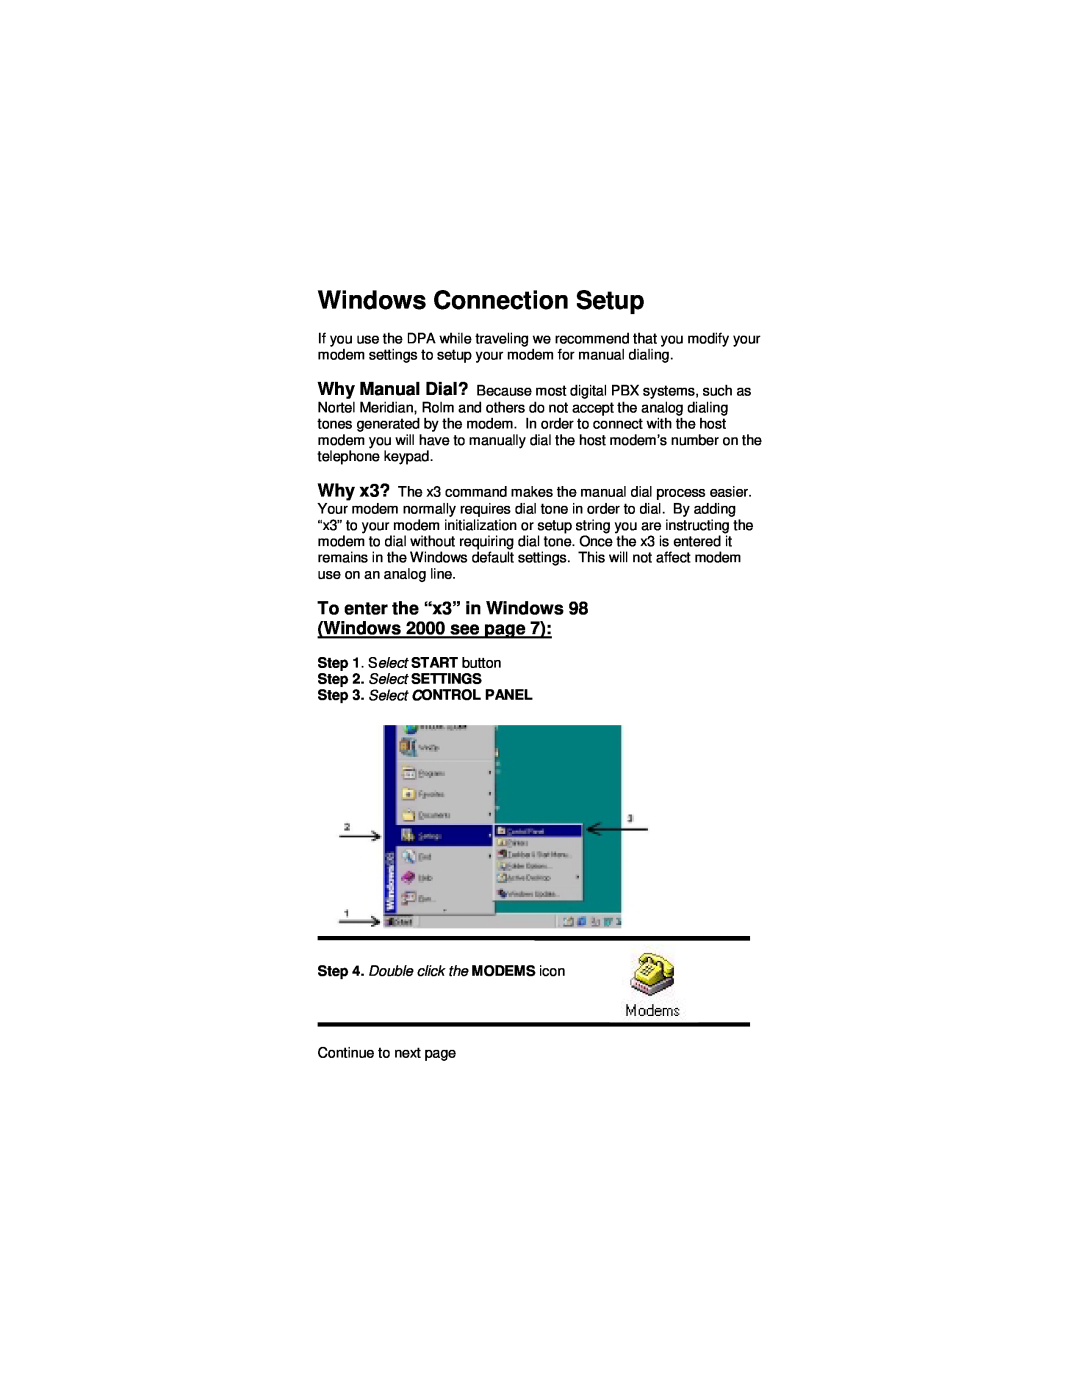 Cortelco network adaptor setup guide Windows Connection Setup, To enter the “x3” in Windows 98 Windows 2000 see page 